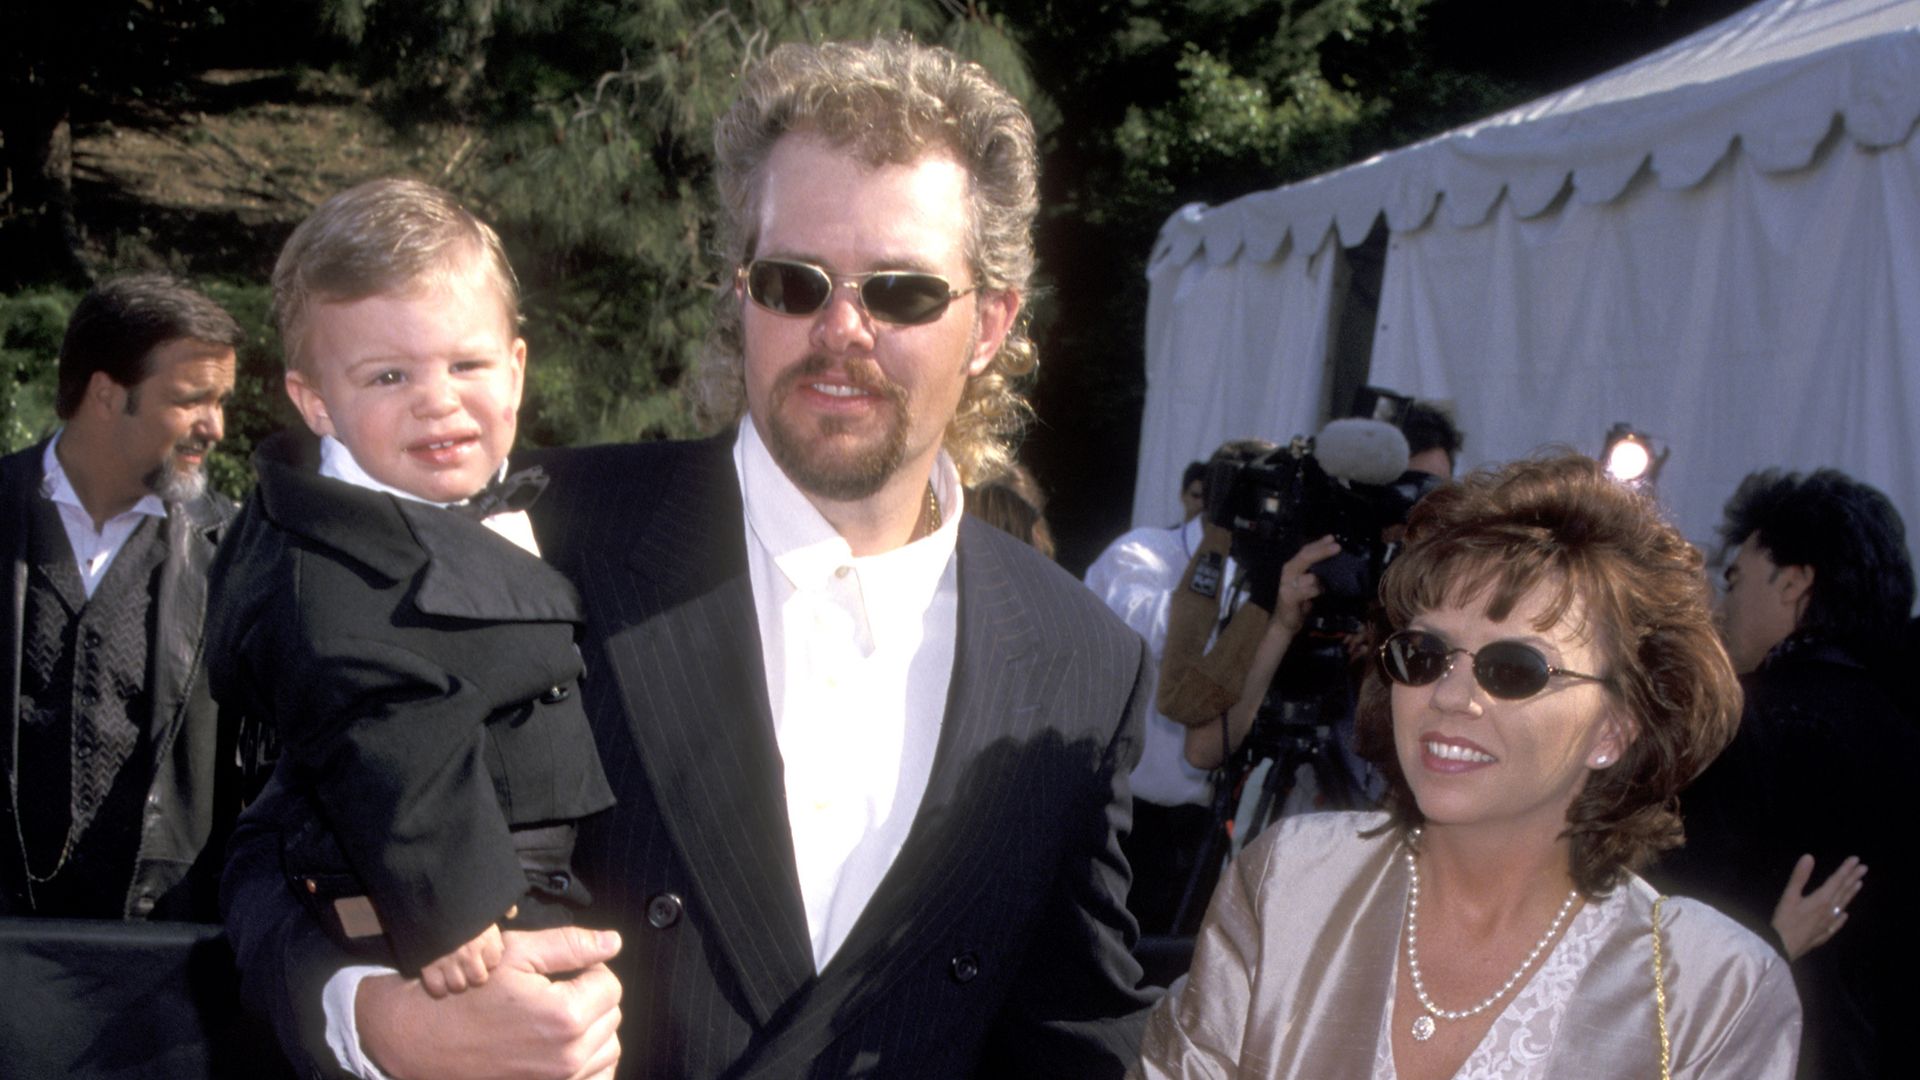 Toby Keith, wife Tricia Covel, and son Stelen Covel